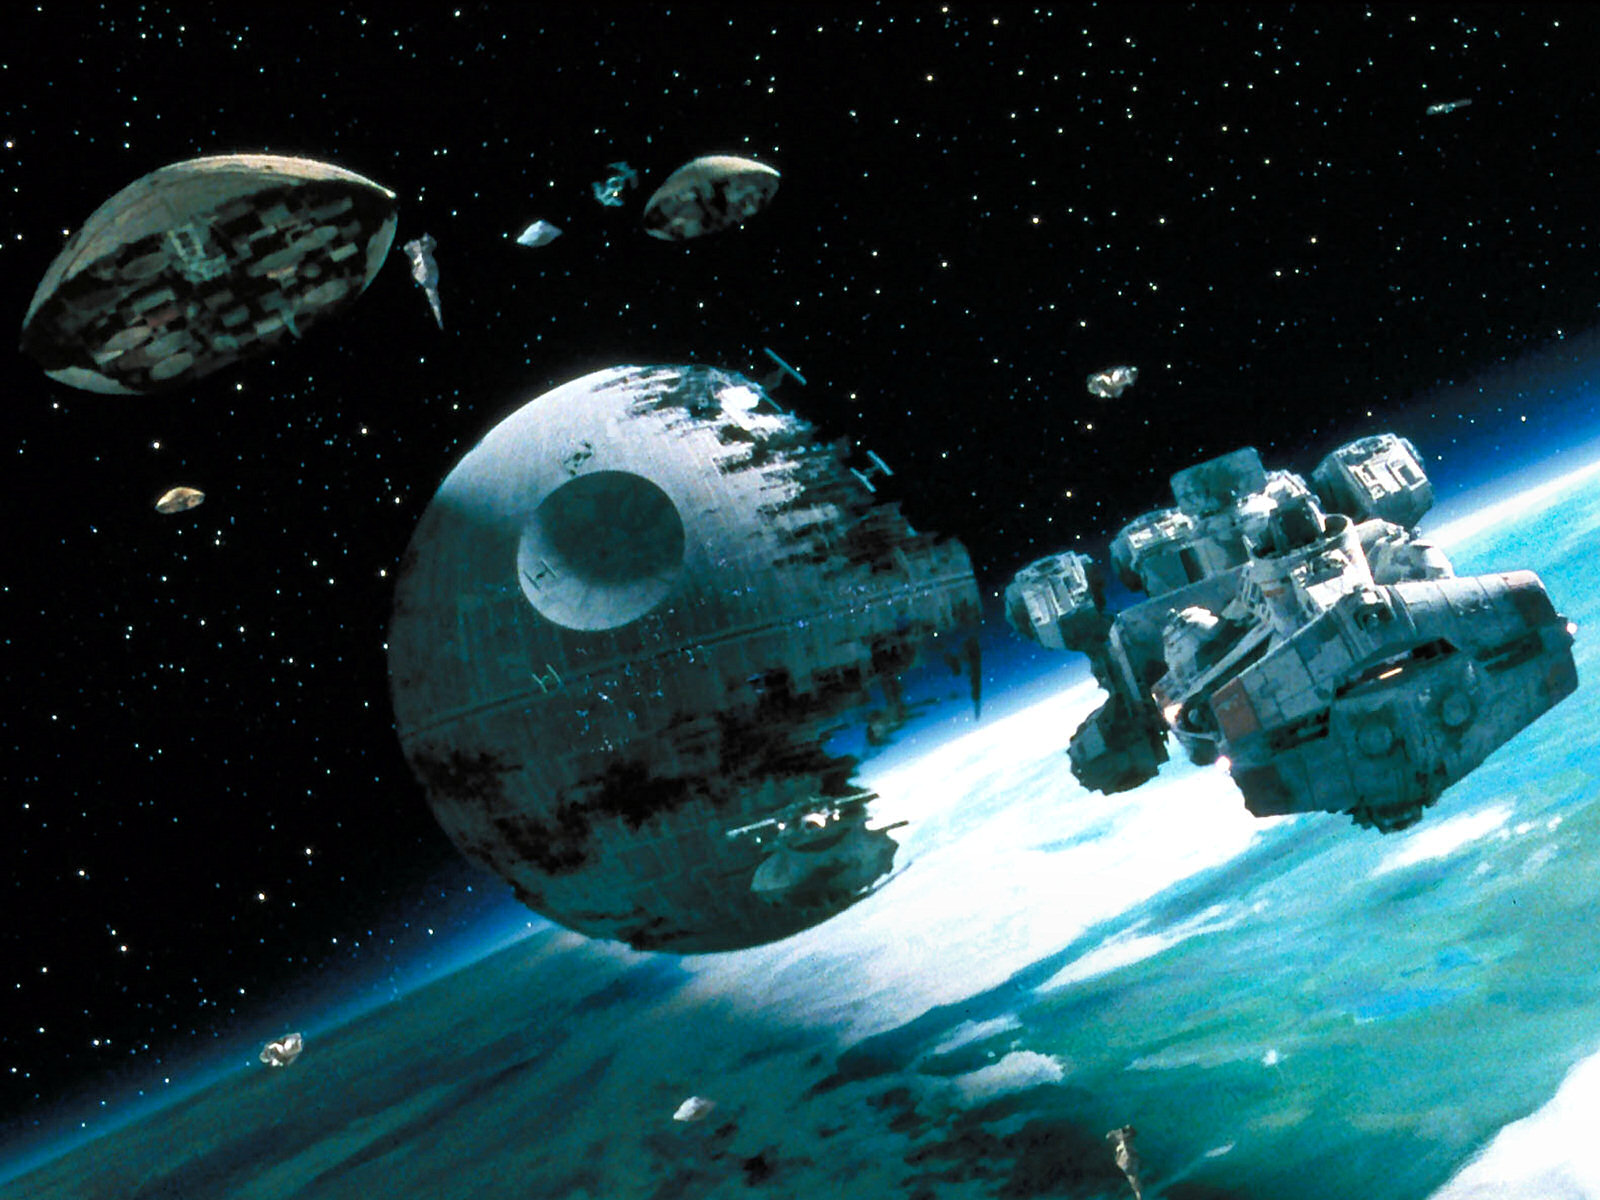 Sci Fi Star Wars Death Star wallpaper: A stunning depiction of the iconic Death Star from the Star Wars series.